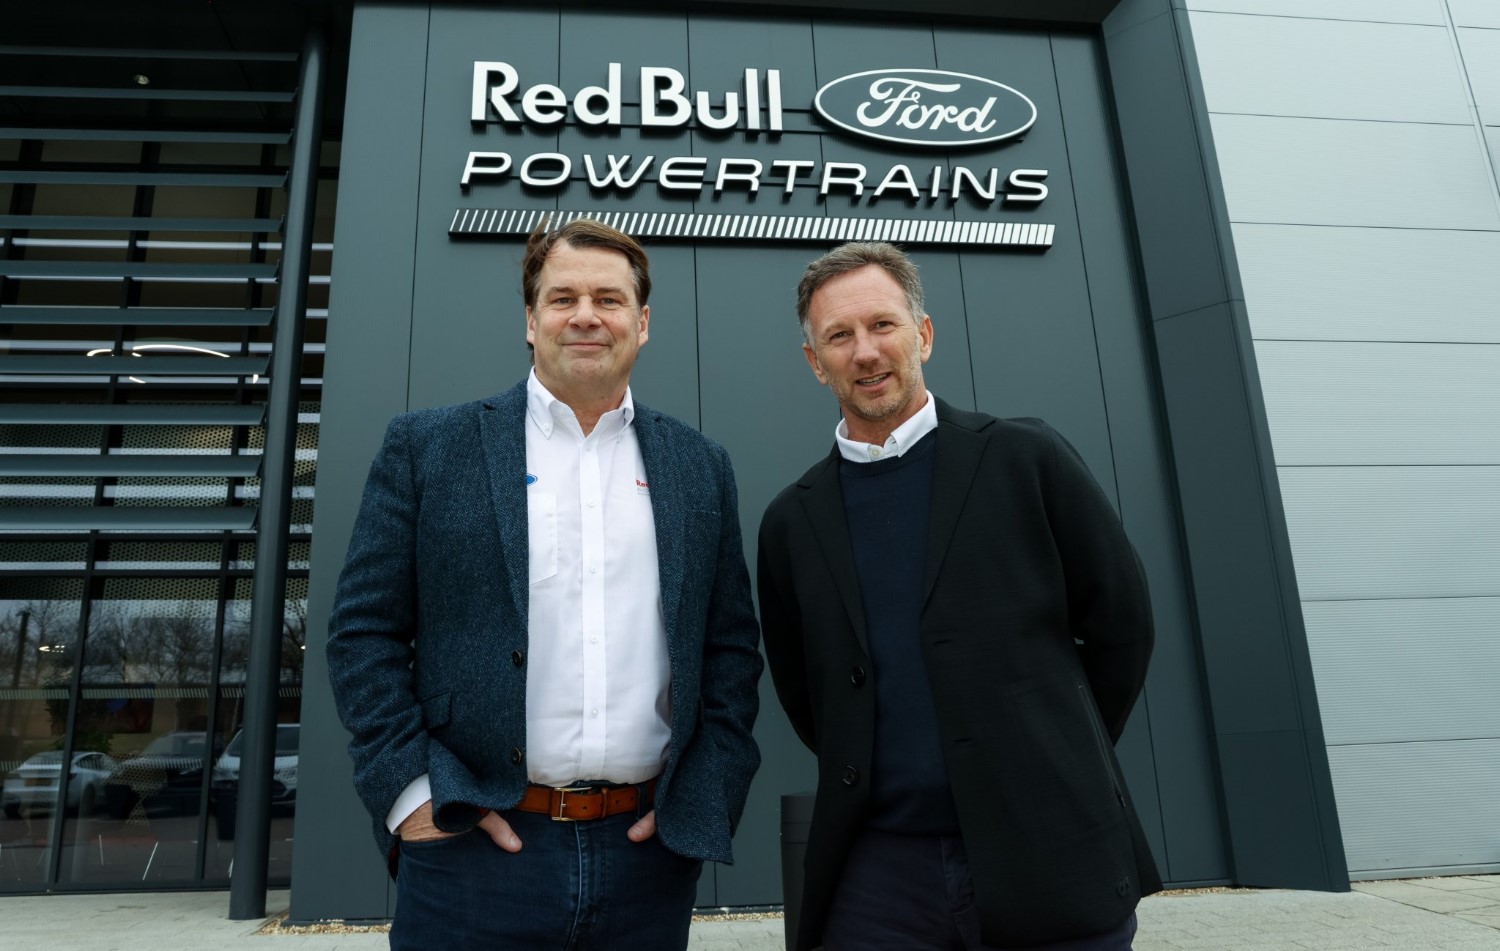 Ford CEO Jim Farley visited the RBPT facility to meet Christian Horner and the Red Bull Racing team